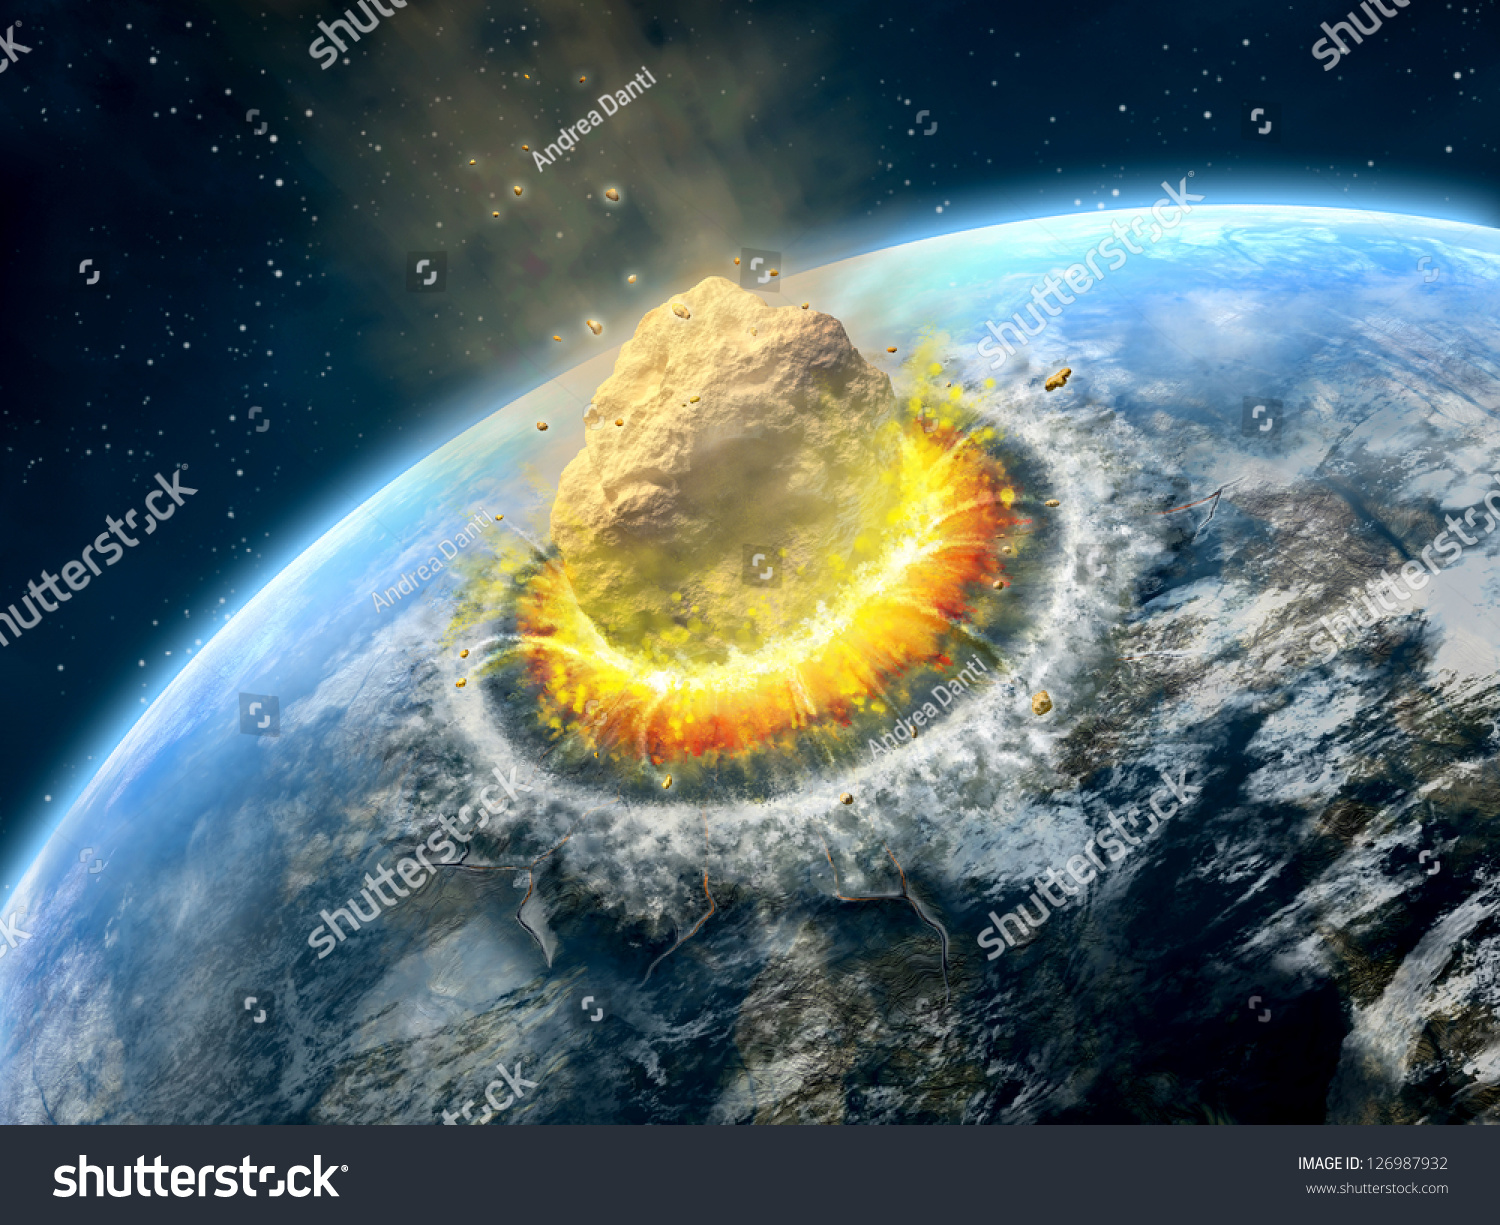 244 Comet Hitting Earth Images Stock Photos And Vectors Shutterstock